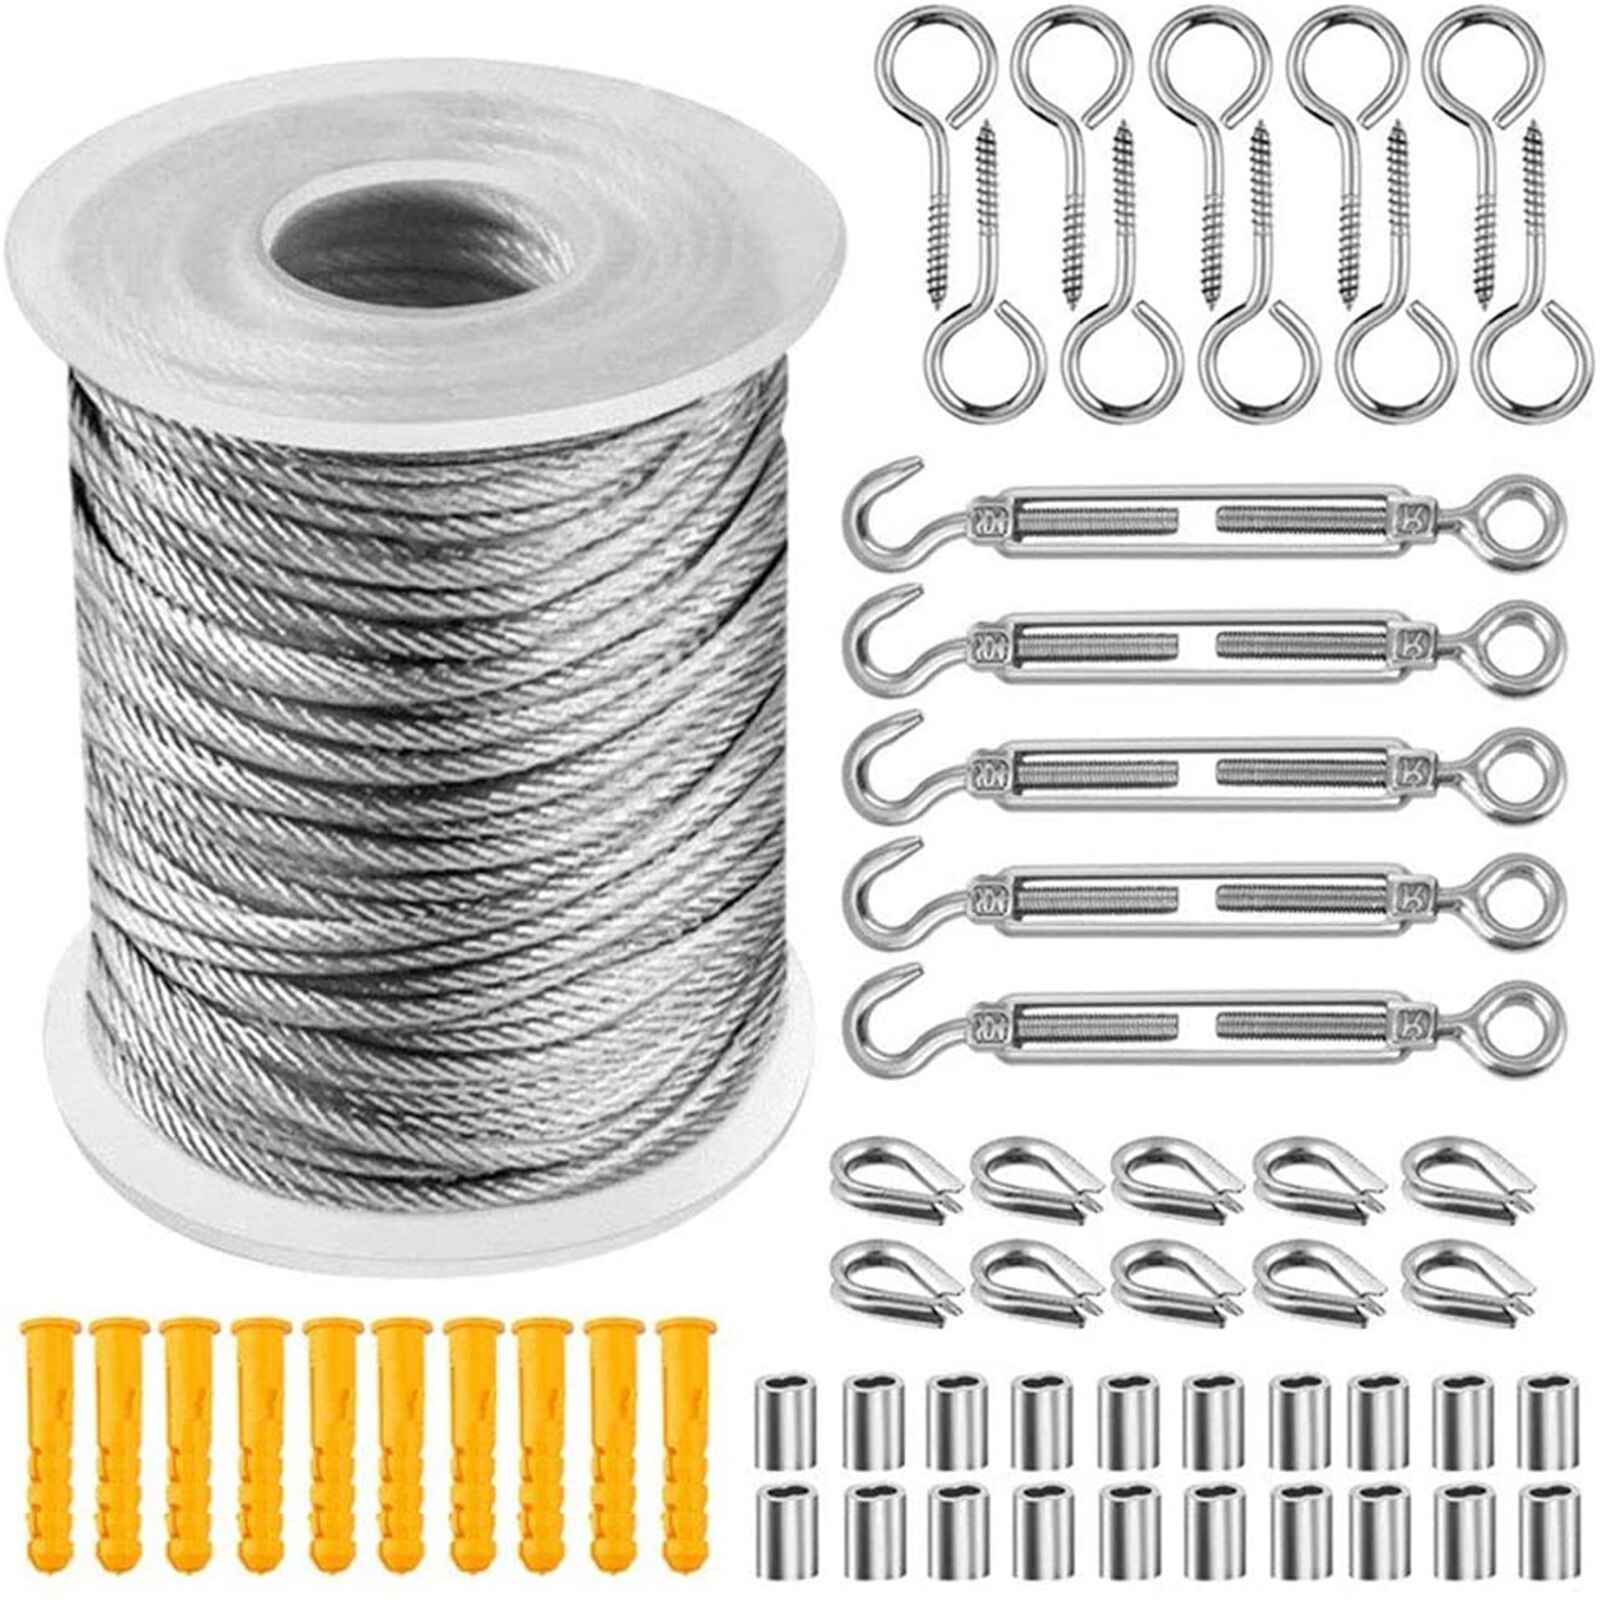 Soft Cable Stainless Steel Clothesline Flexible Wire Rope 57PCS Diameter 2mm Kit 30Meters Hooks Coated Flexible Wire Rope